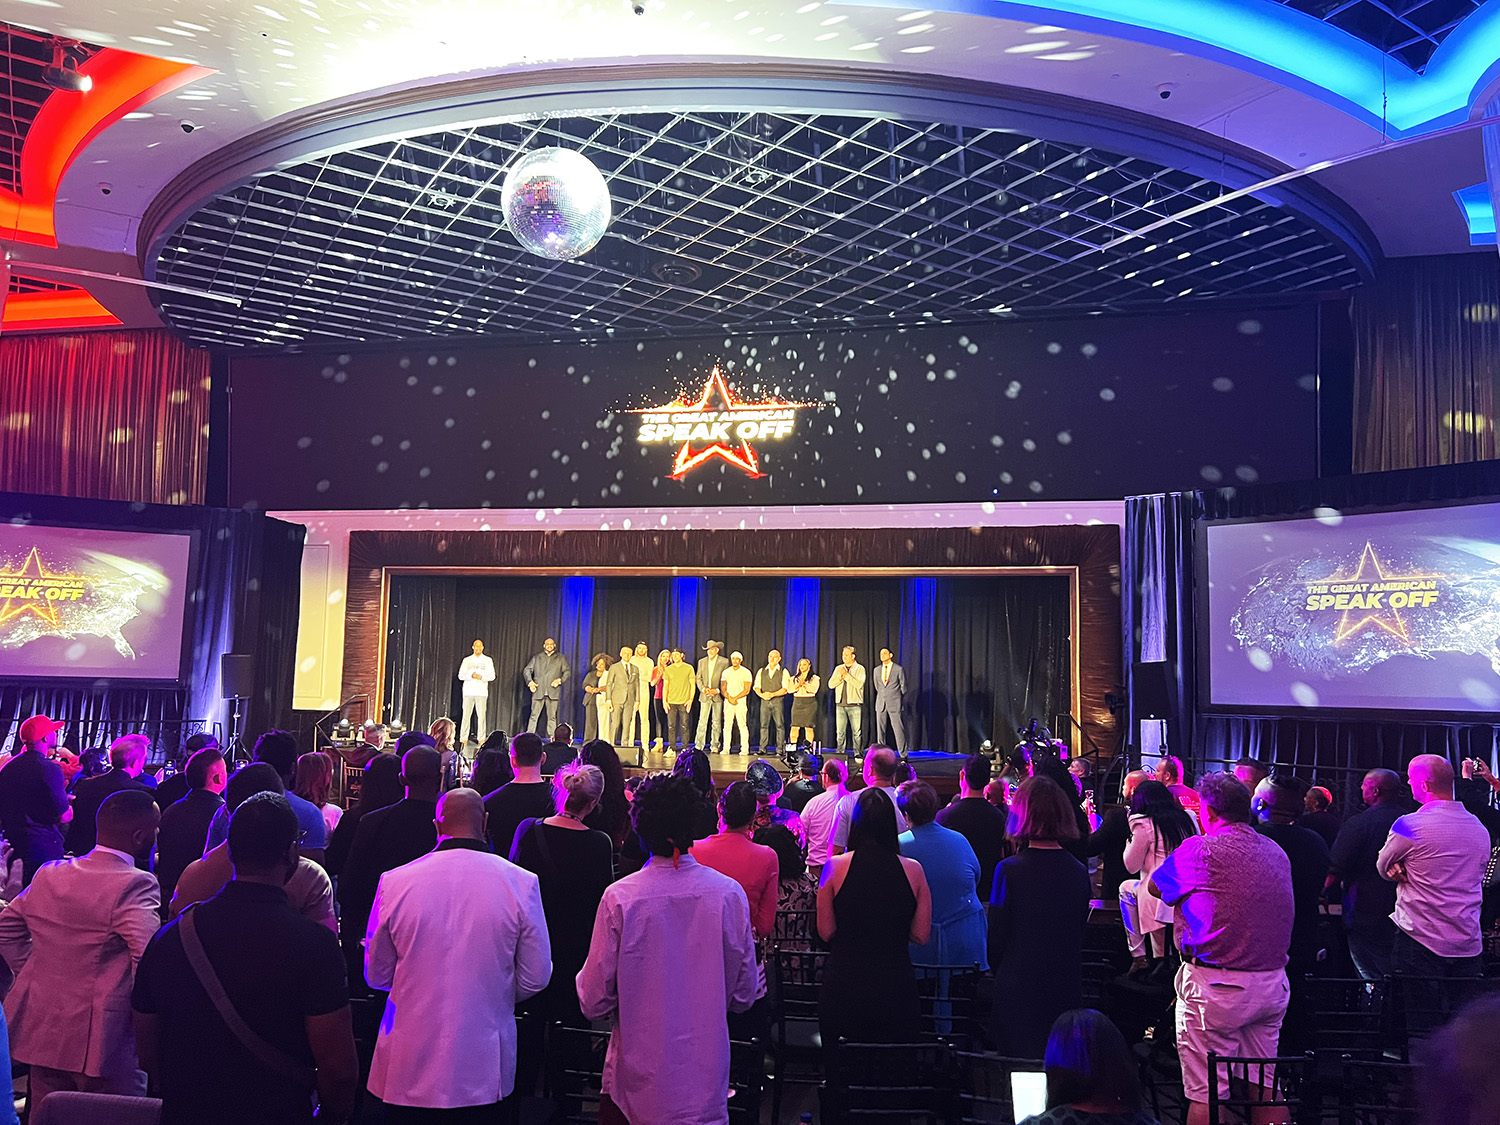 A vibrant event with a standing audience applauding a group on stage, under a disco ball, with screens displaying 'SPEAK OFF' and starry lighting effects.